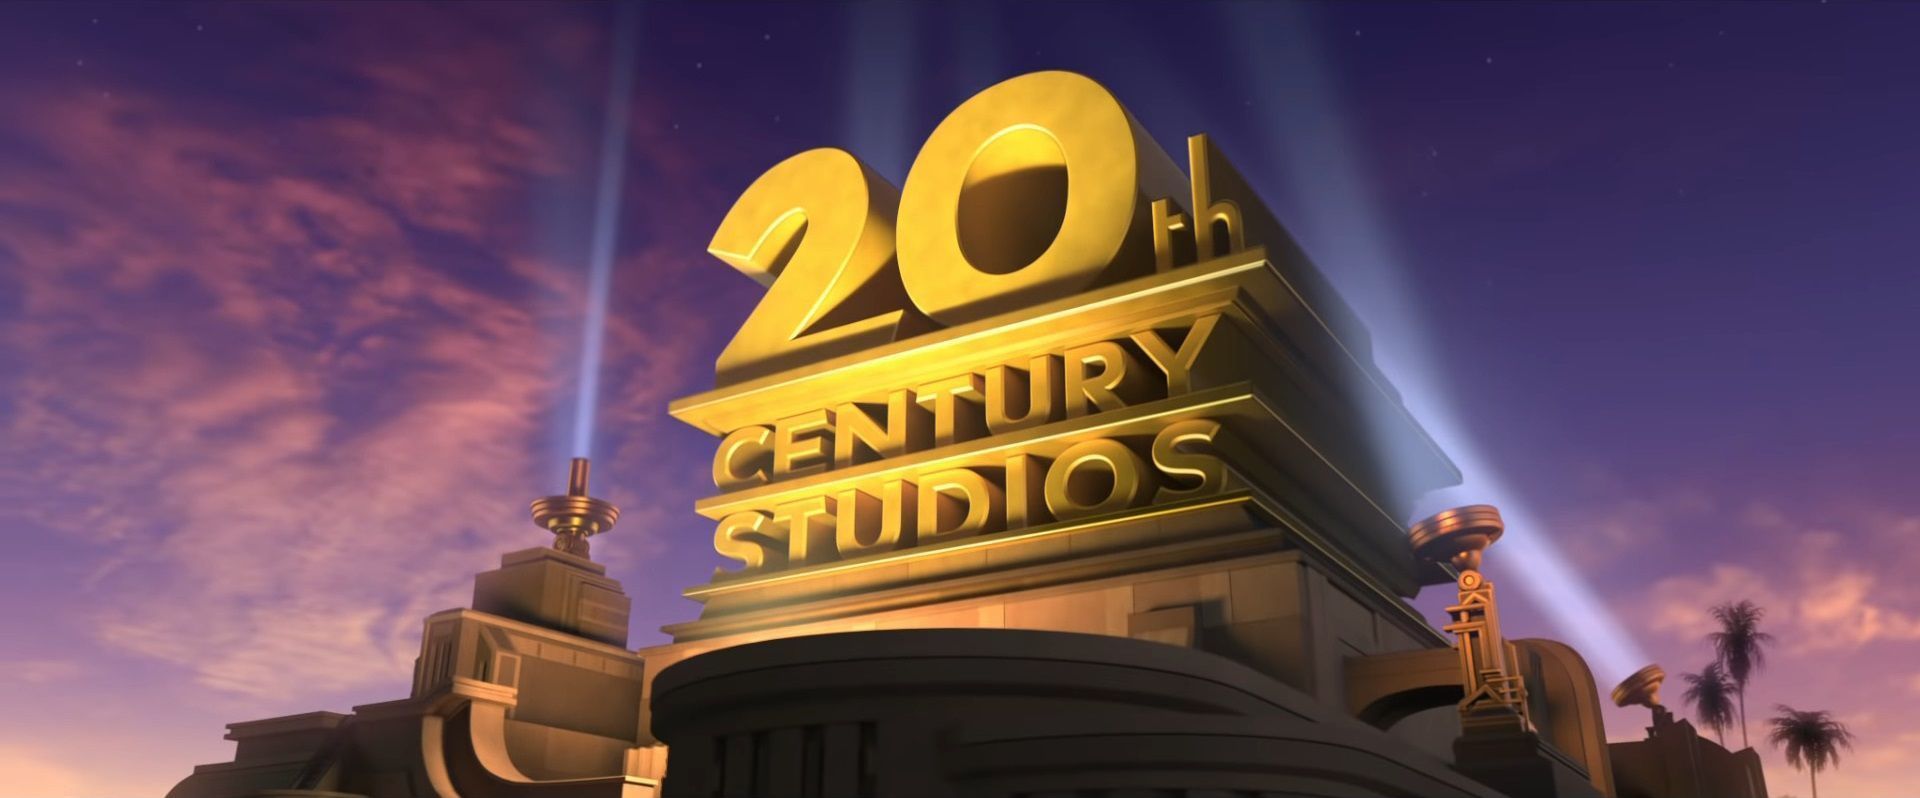 Disney sued $10,000 by 3 Discord users for rebranding 20th Century Fox to 20th Century Studios